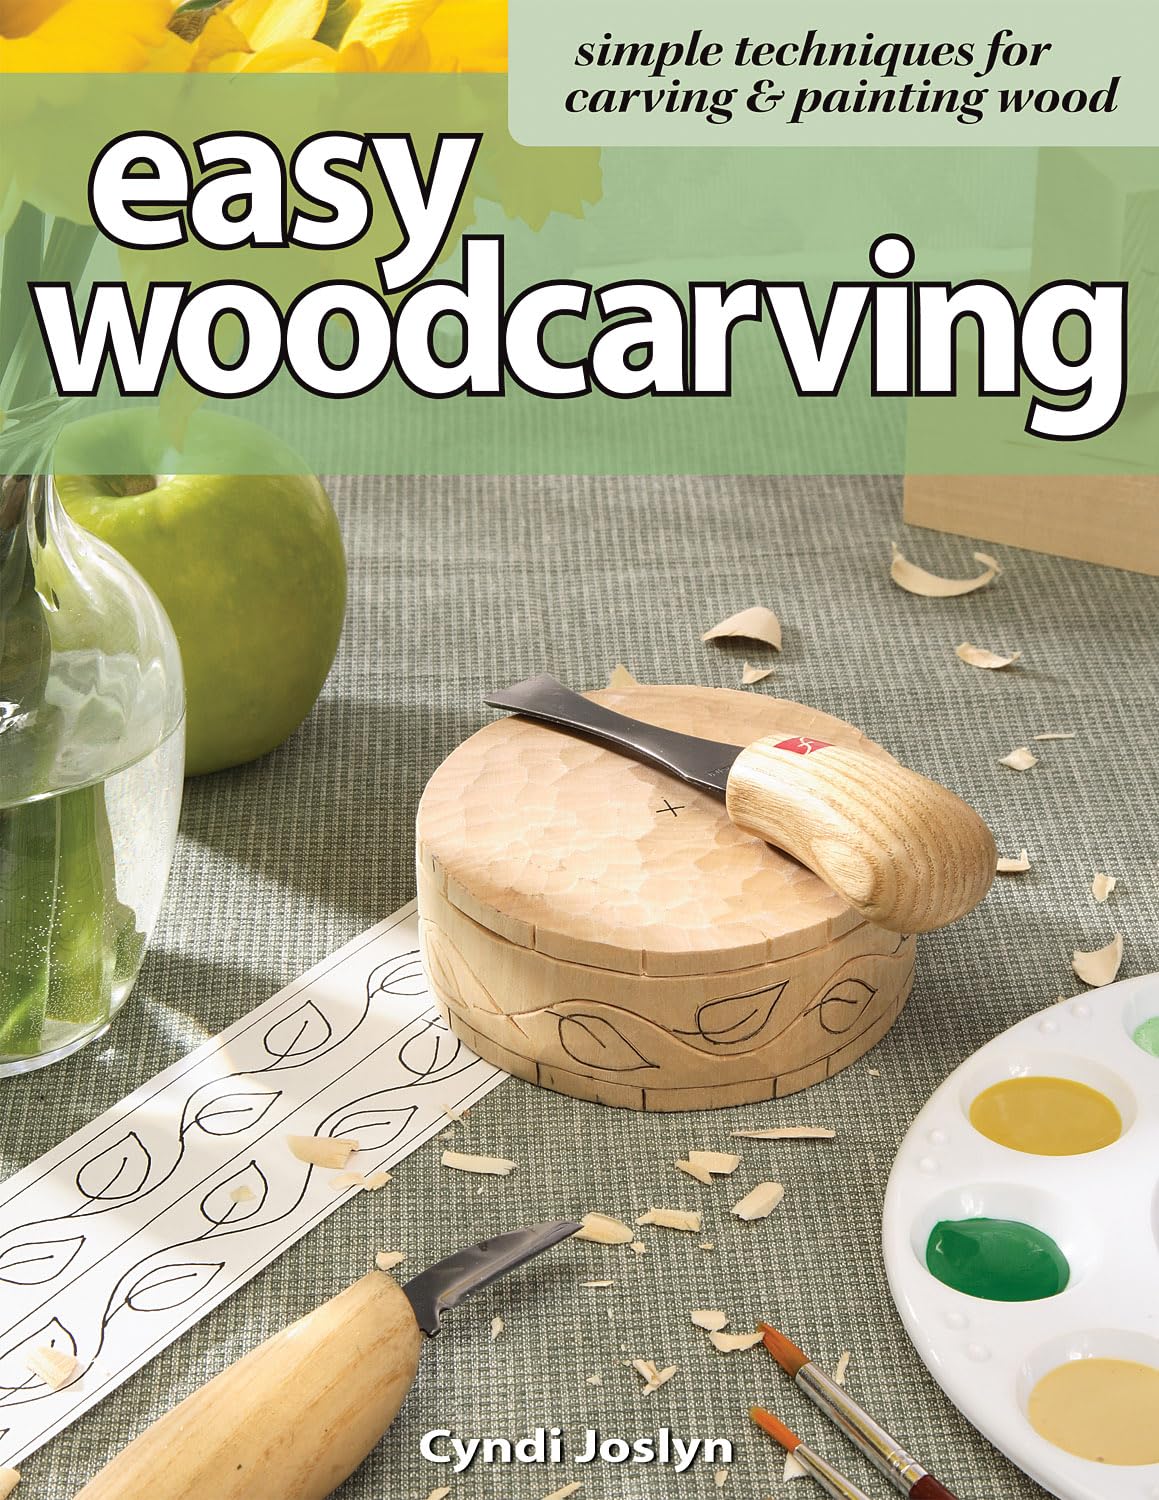 Easy Woodcarving: Simple Techniques for Carving and Painting Wood (Fox Chapel Publishing) Beginner-Friendly Guide to Getting Started; Step-by-Step